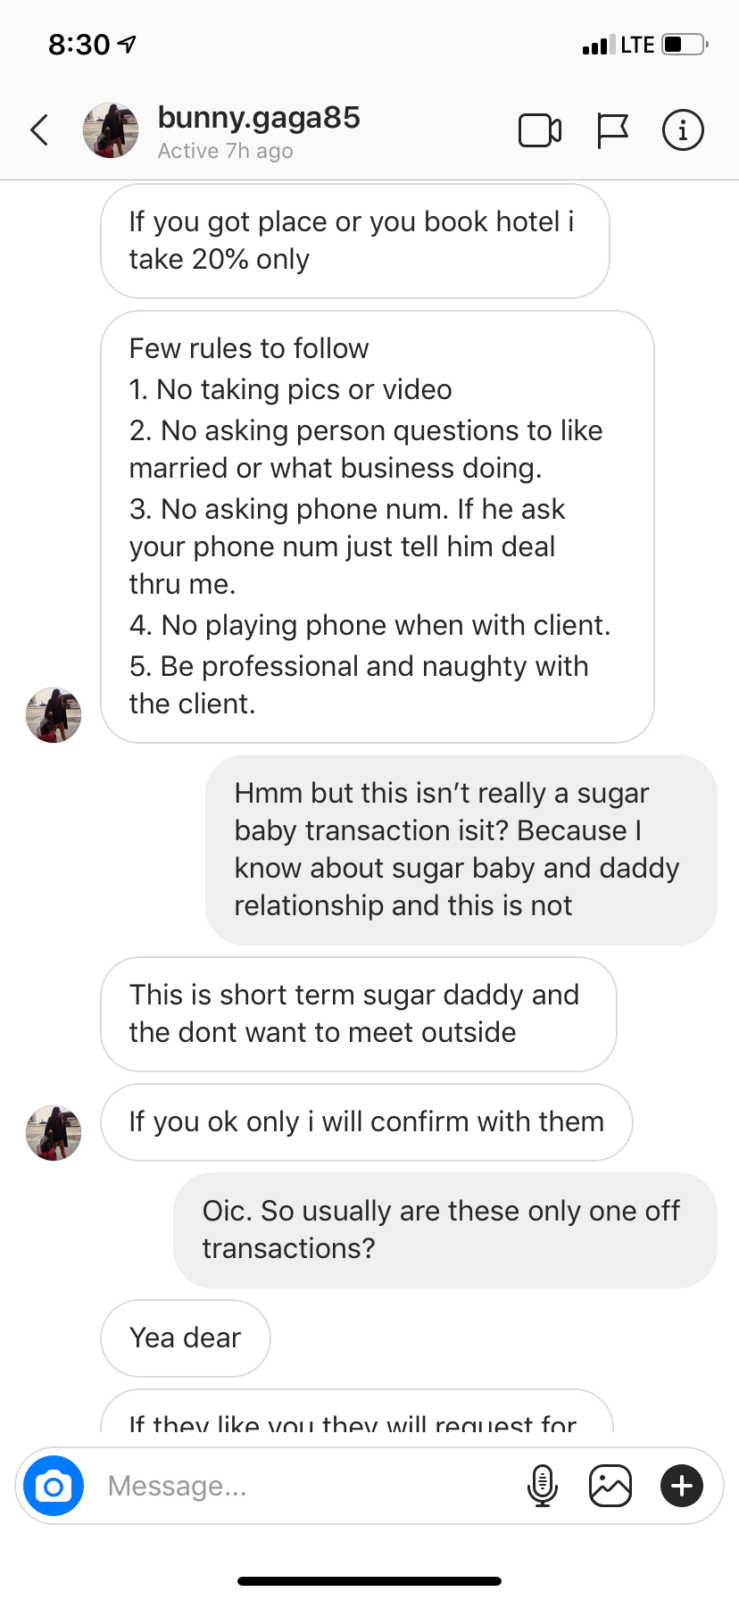 A Sugar Daddy Agent Messaged Me on Instagram and Said I Could Earn RM40,000 A Month - WORLD OF BUZZ 5